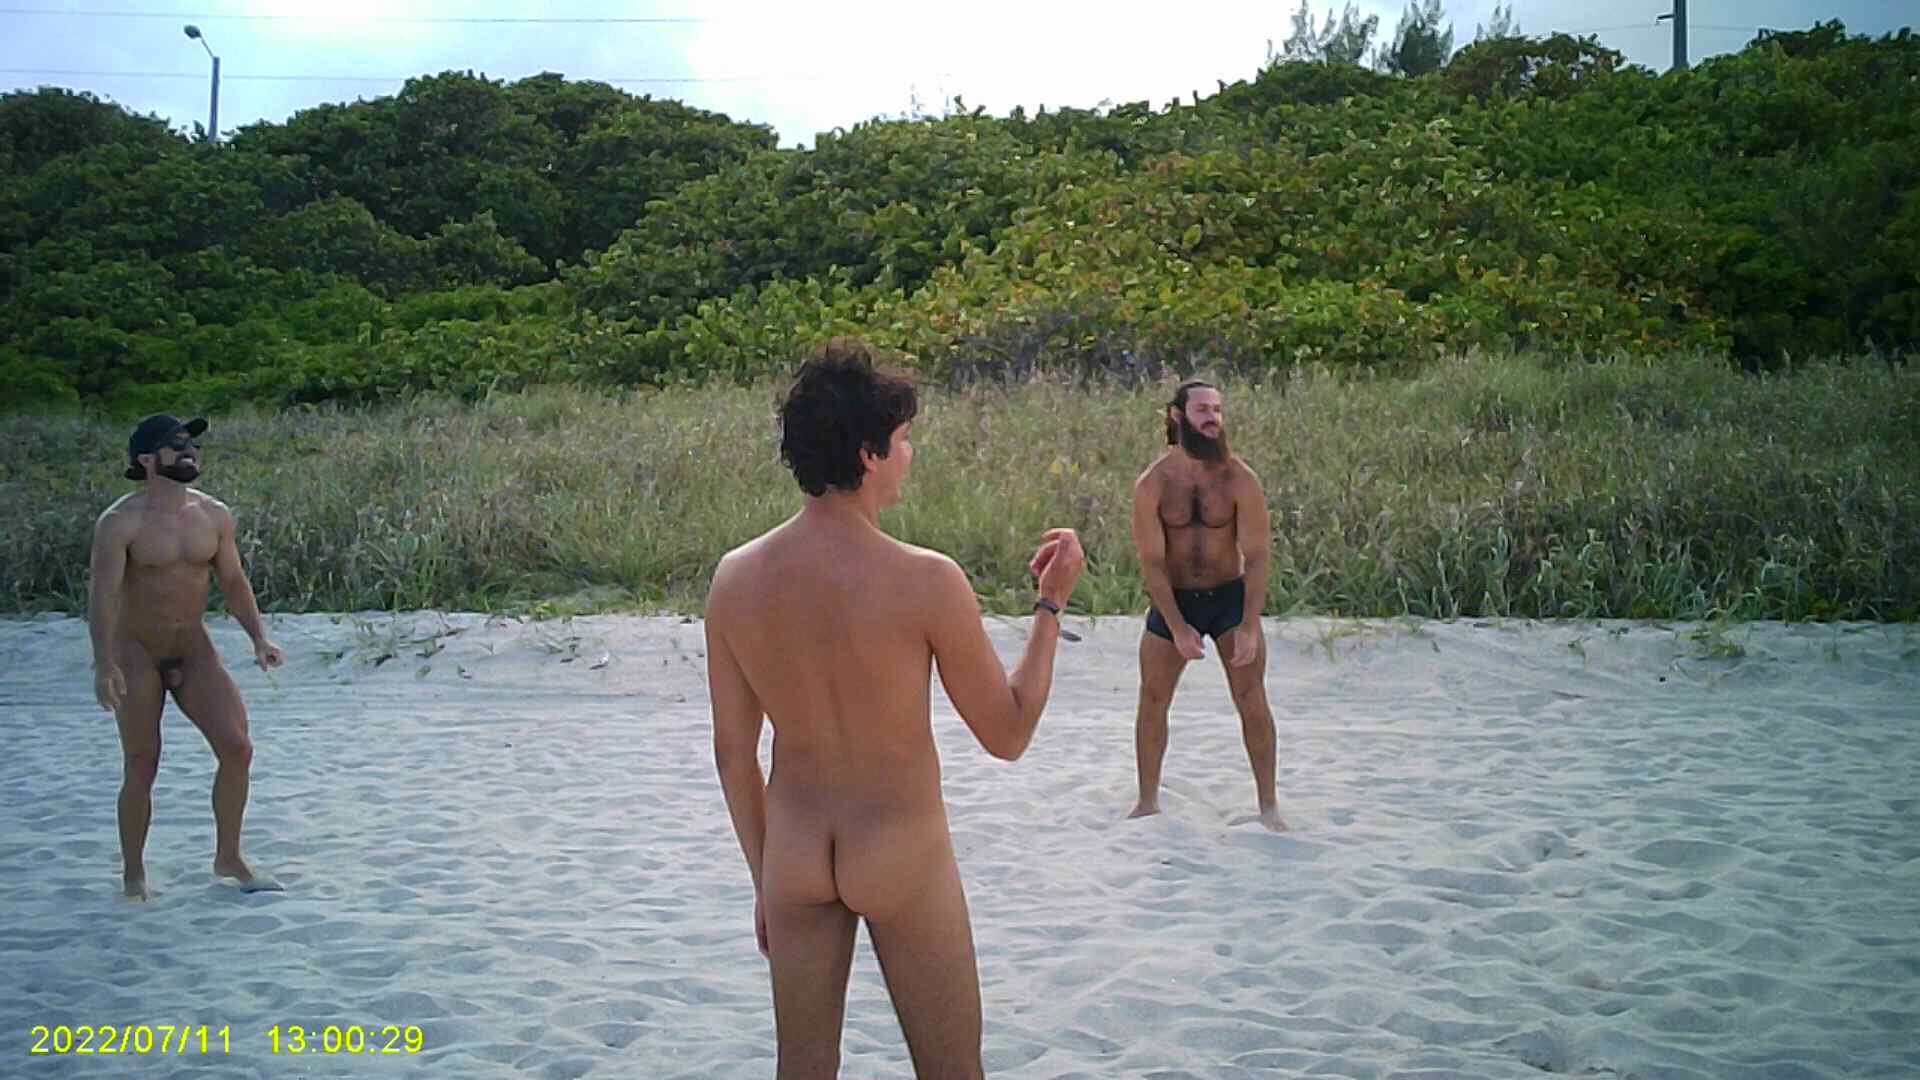 Sort of Volleyball on the Nude Beach